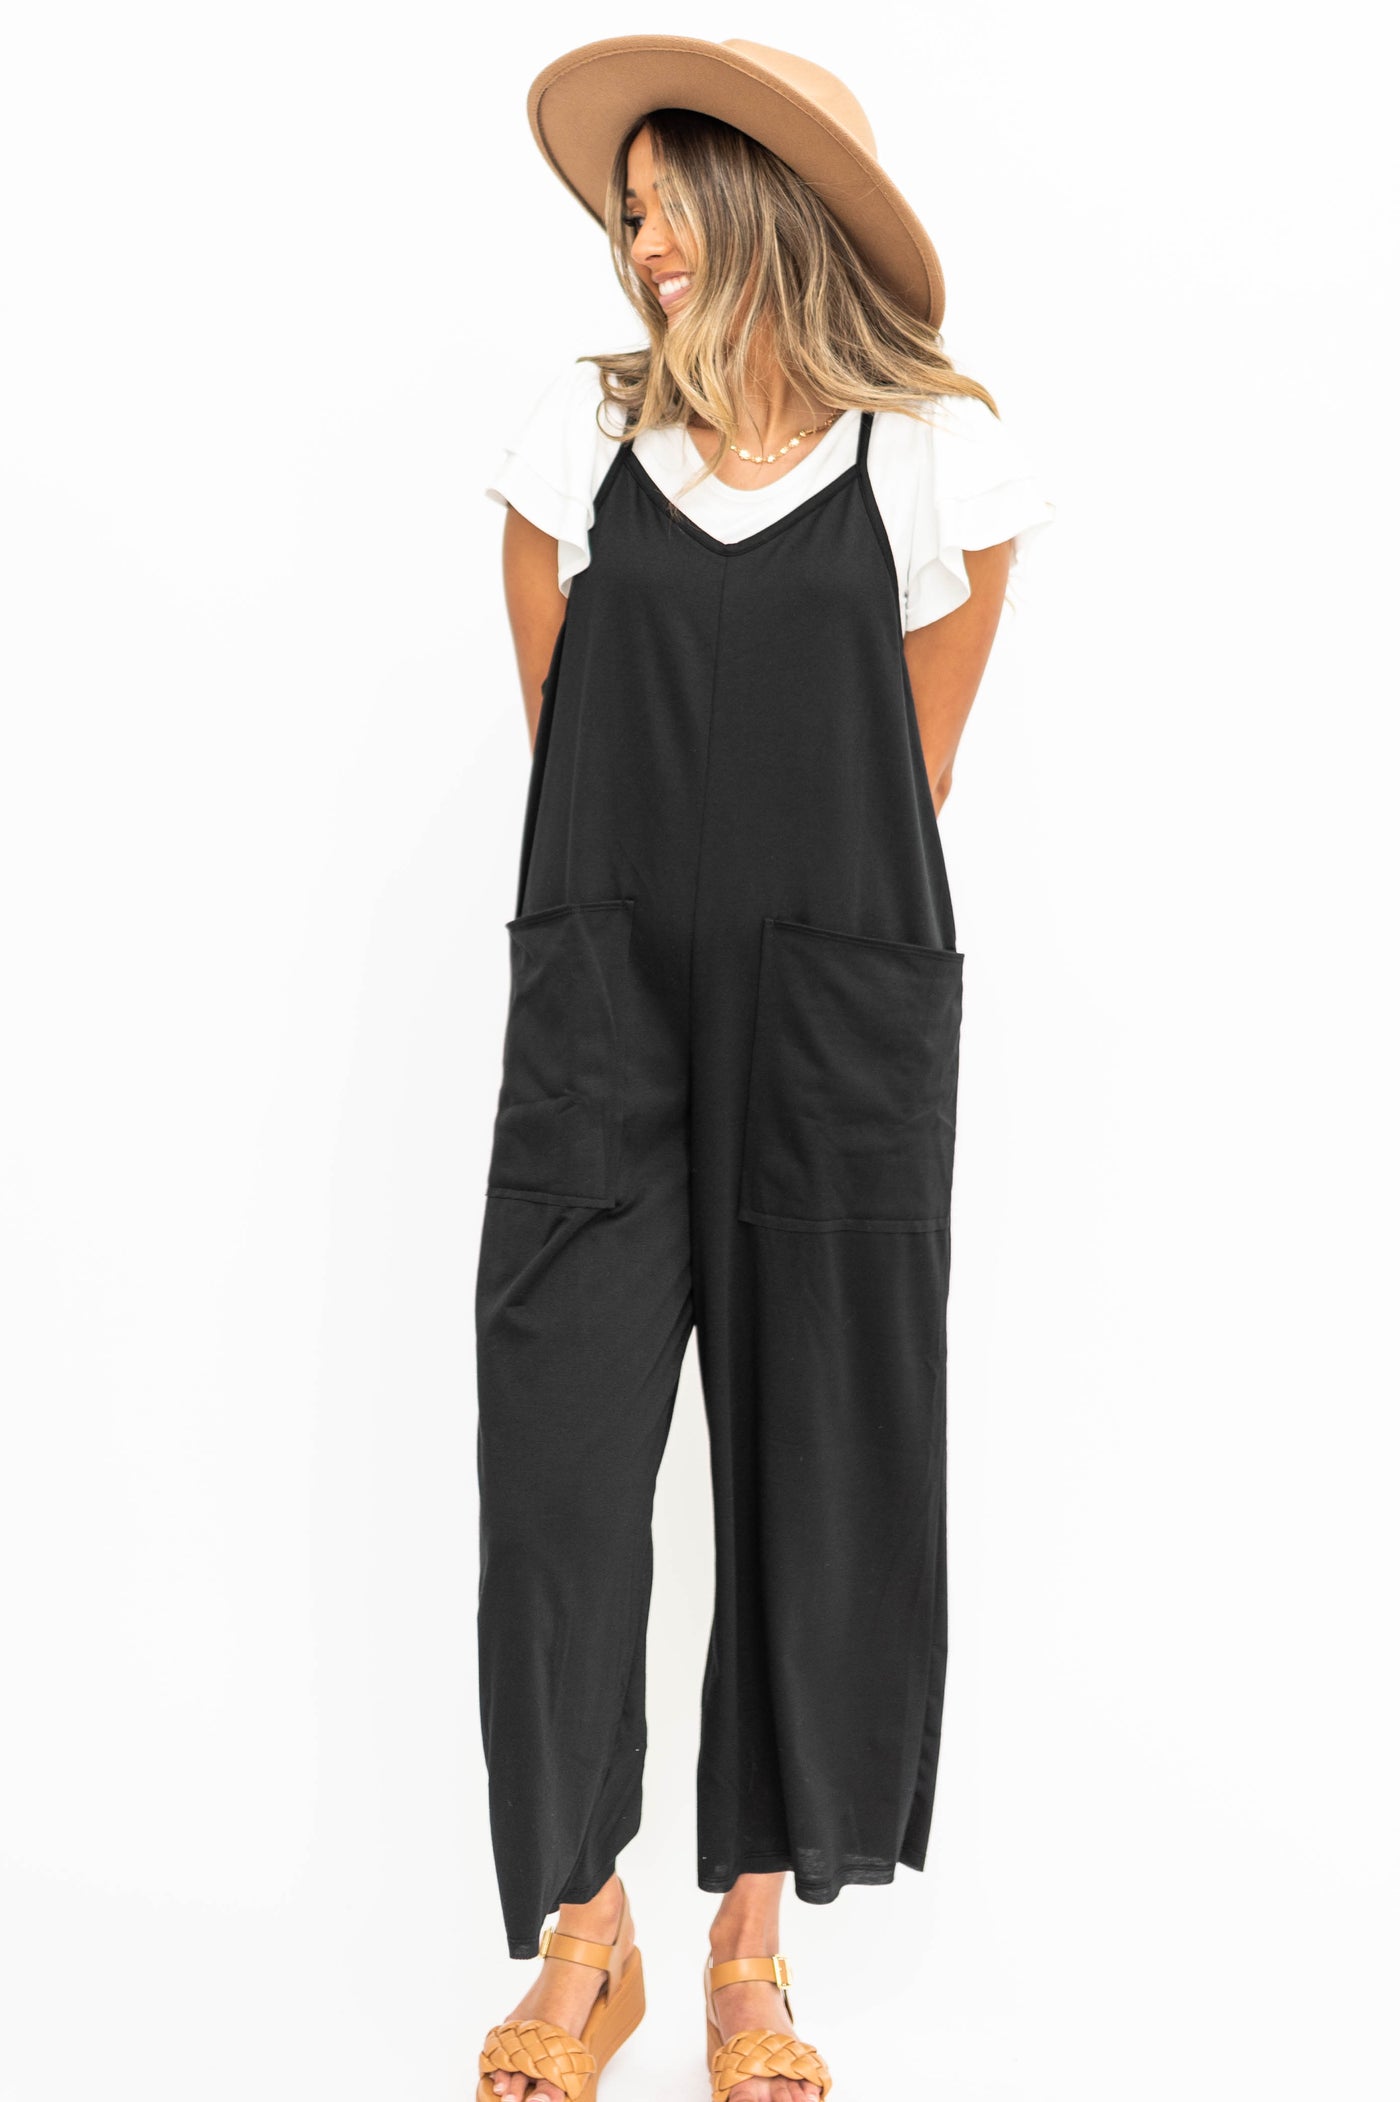 Small black jump suit